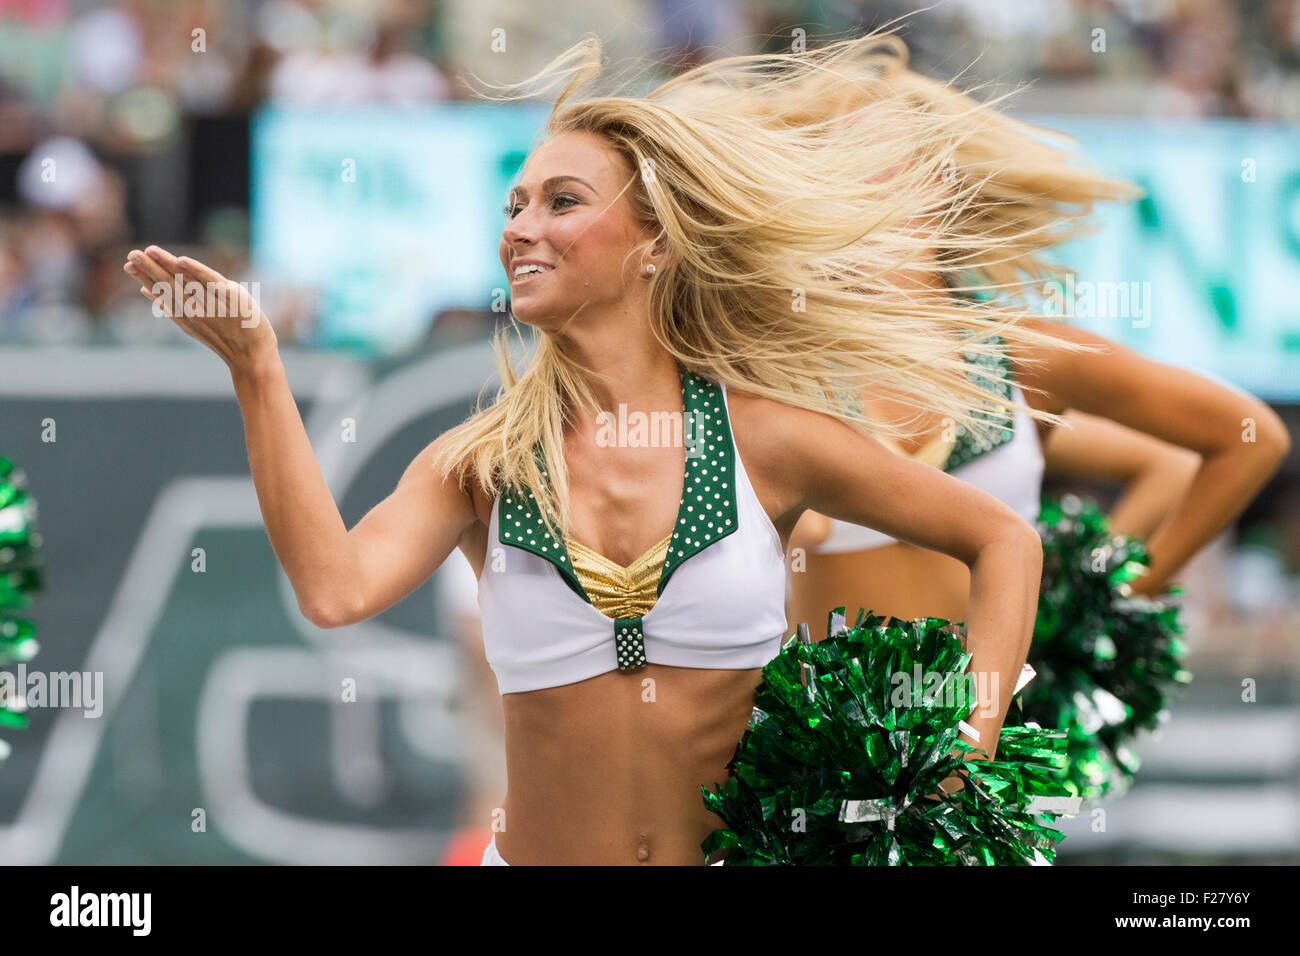 East Rutherford, New Jersey, USA. 13th Sep, 2015. New York Jets Flight Crew in action during the NFL game between the Cleveland Browns and the New York Jets at MetLife Stadium in East Rutherford, New Jersey. The New York Jets won 31-10. Christopher Szagola/CSM/Alamy Live News Stock Photo